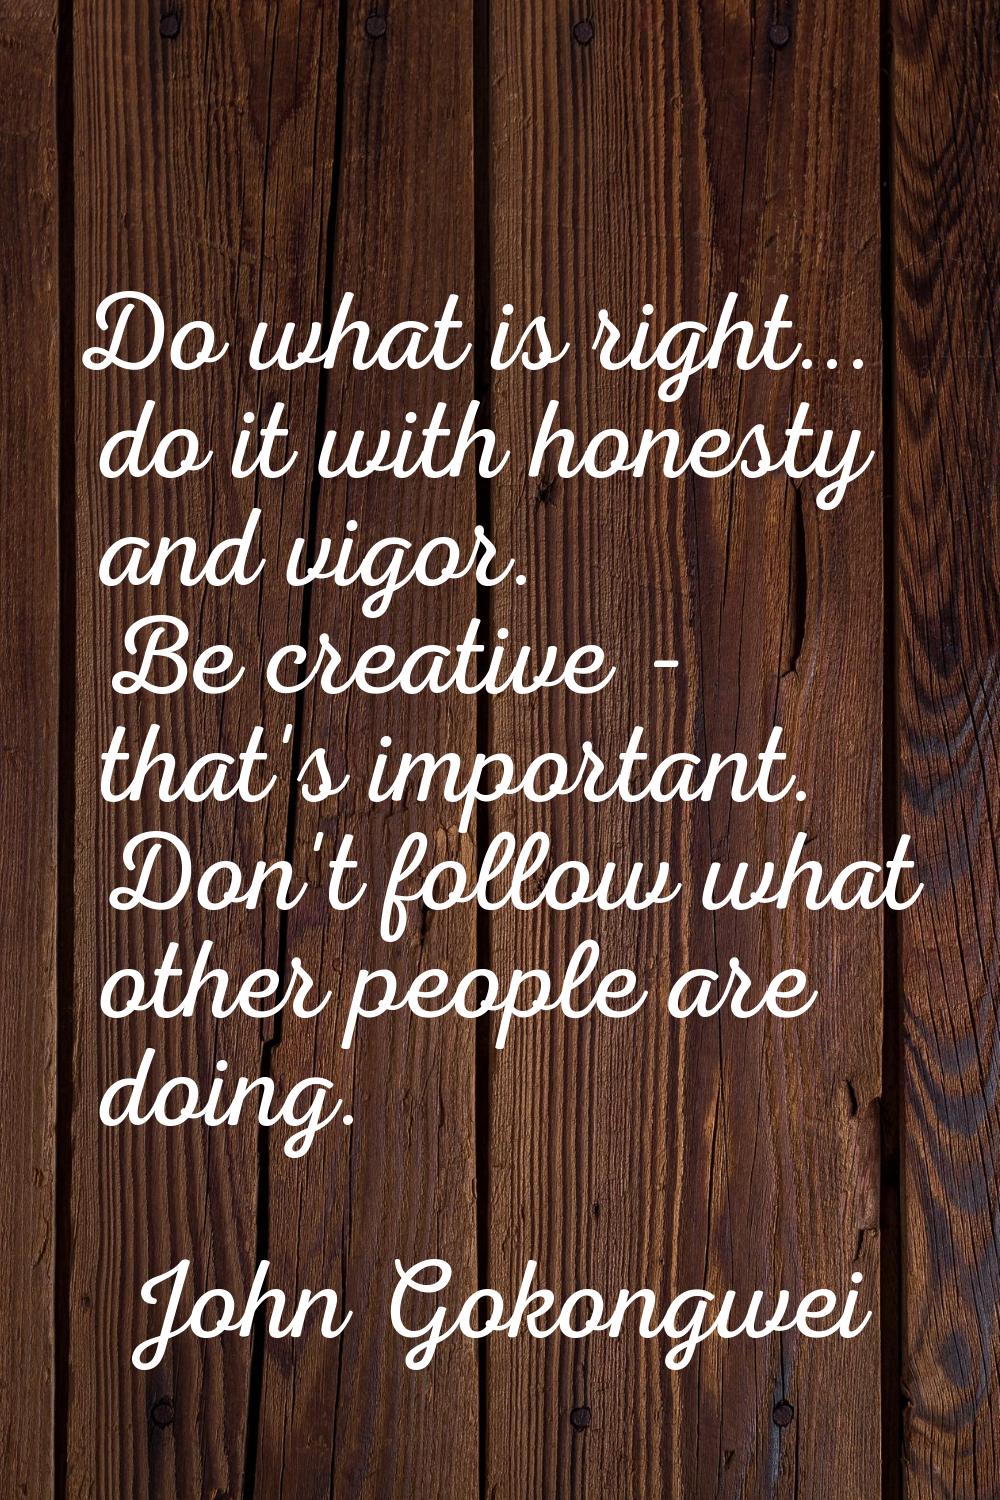 Do what is right... do it with honesty and vigor. Be creative - that's important. Don't follow what